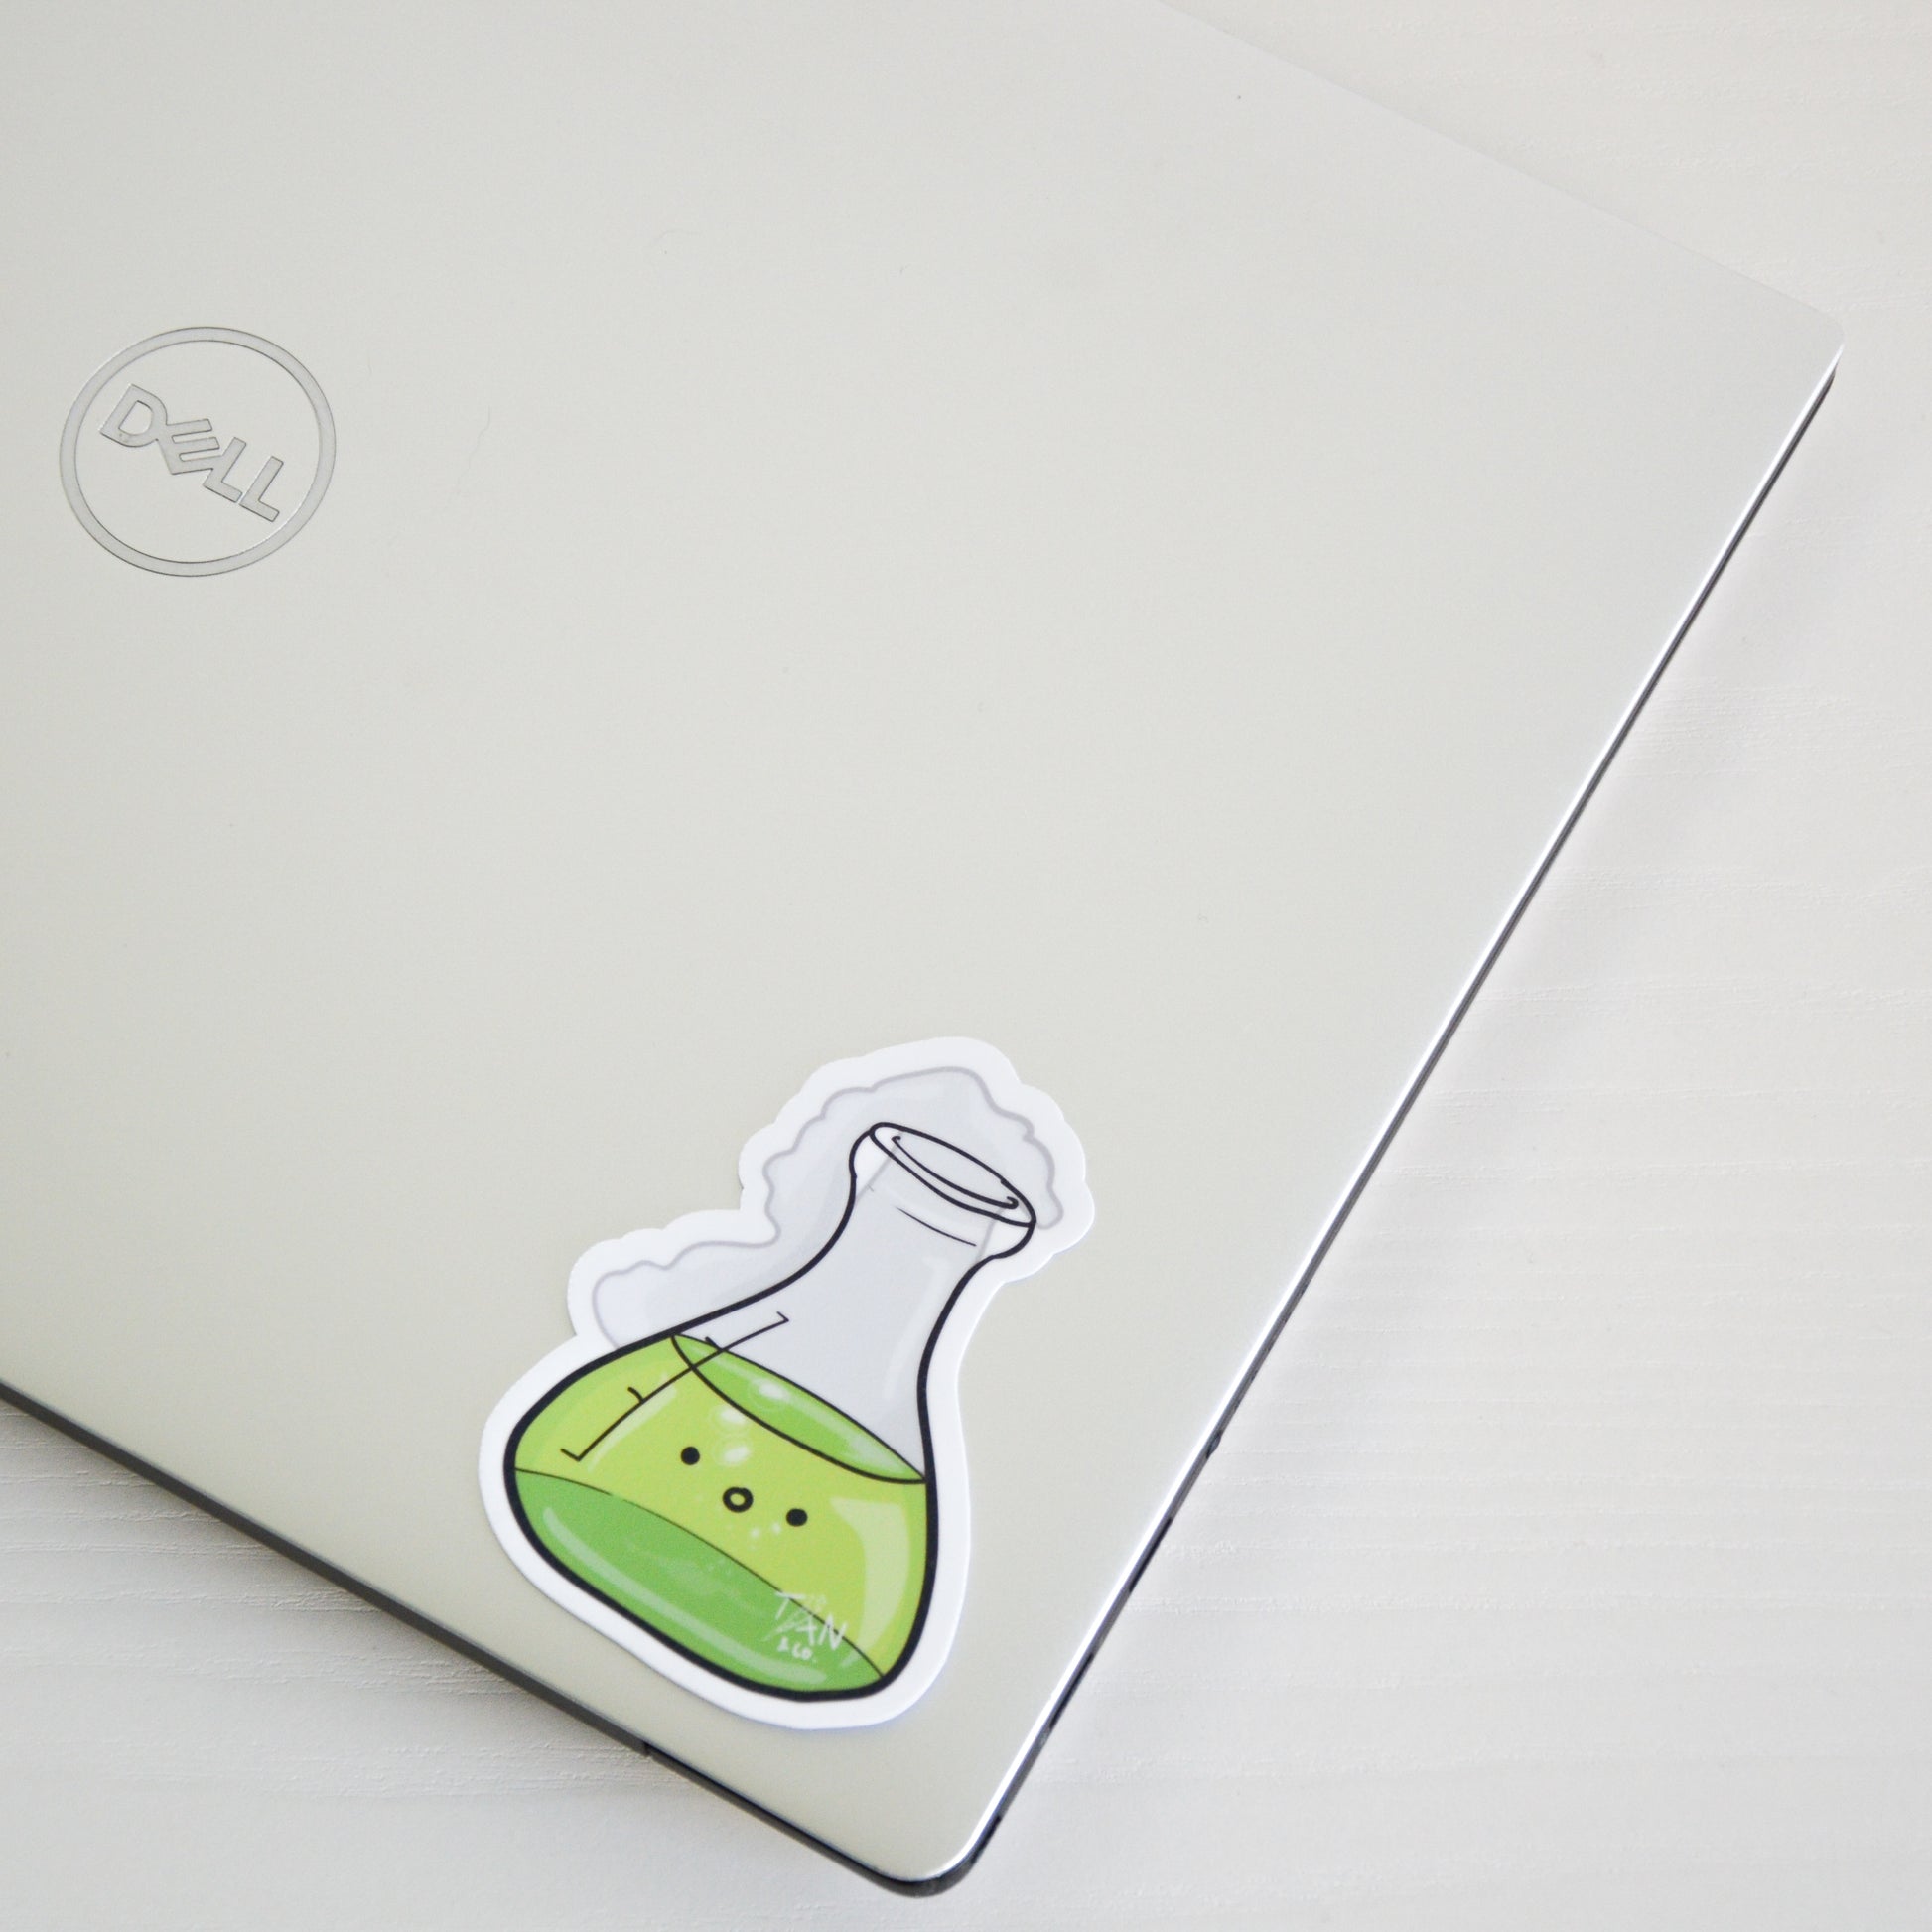 Green conical flask on laptop